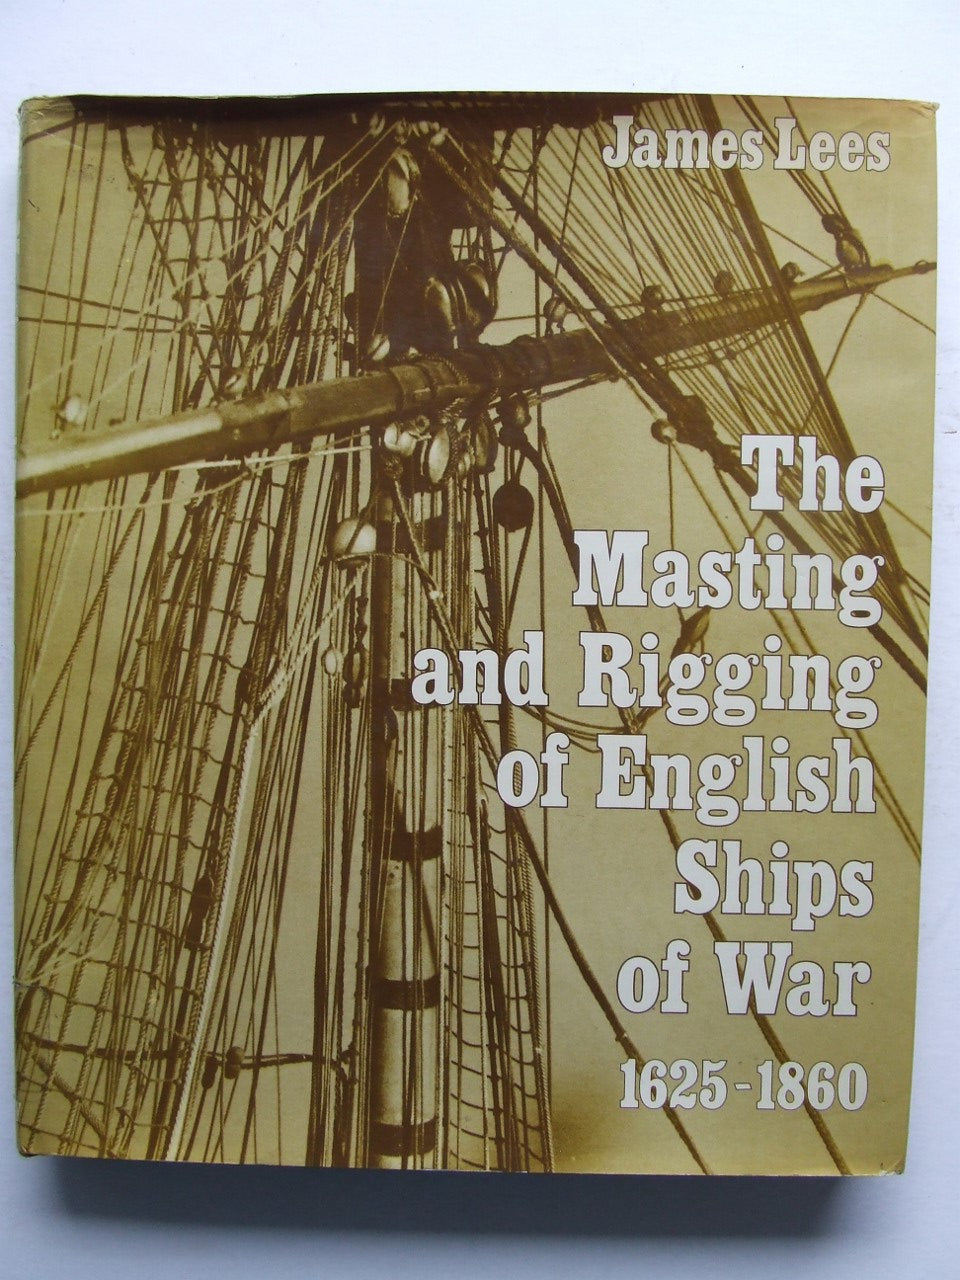 The Masting and Rigging of English Ships of War 1625-1860